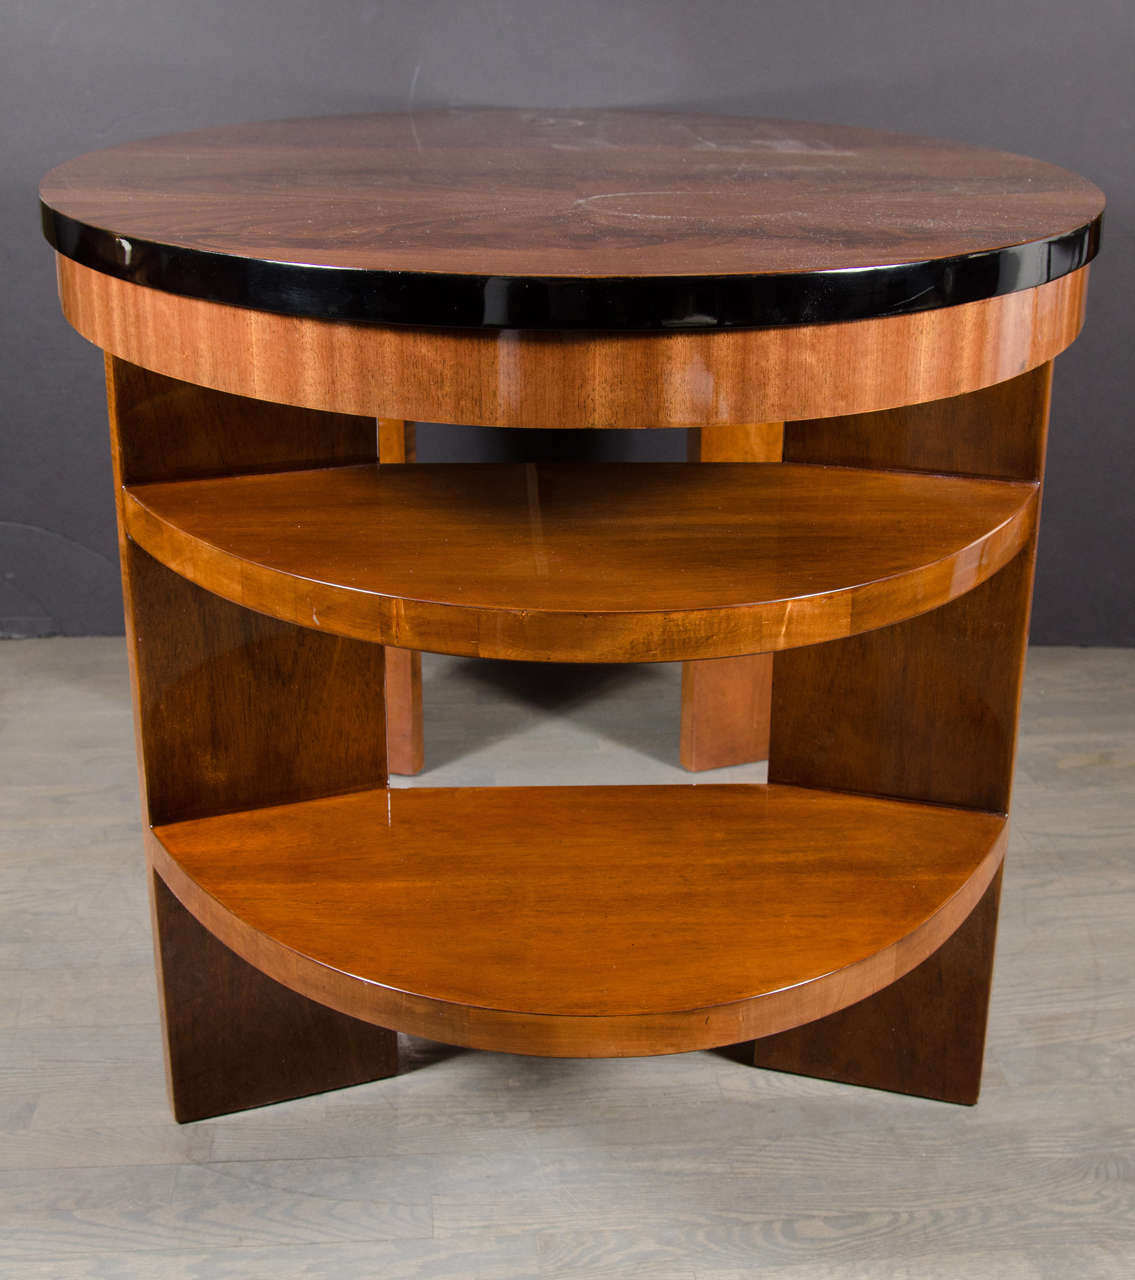 20th Century Streamline Art Deco Machine Age Oval Desk in Exotic Bookmatched Crotch Mahogany